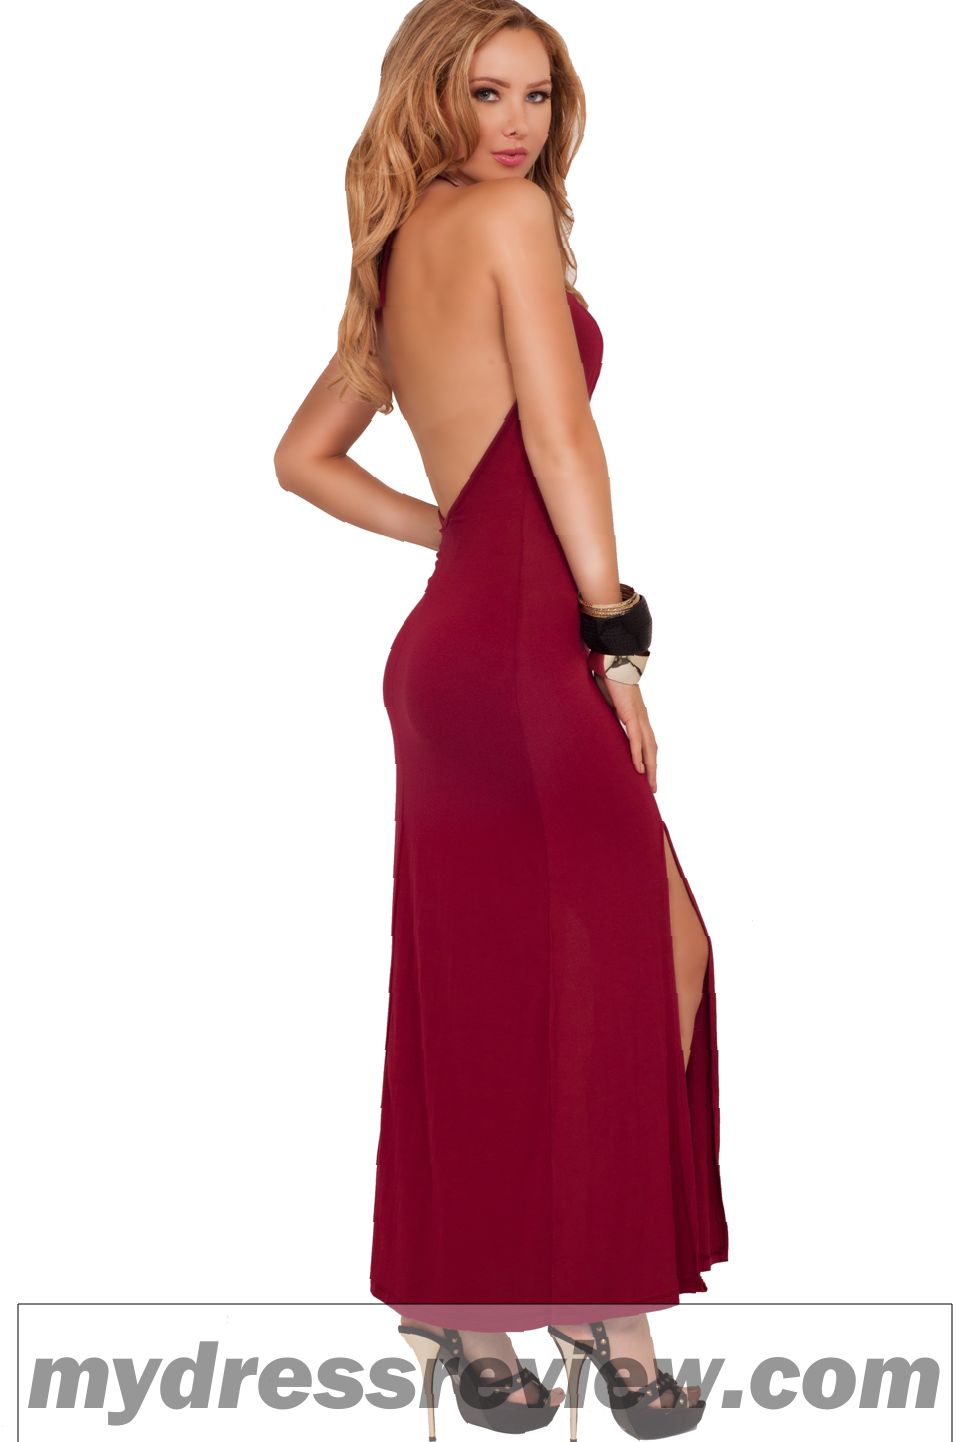 Halter Tie Dress - The Trend Of The Year